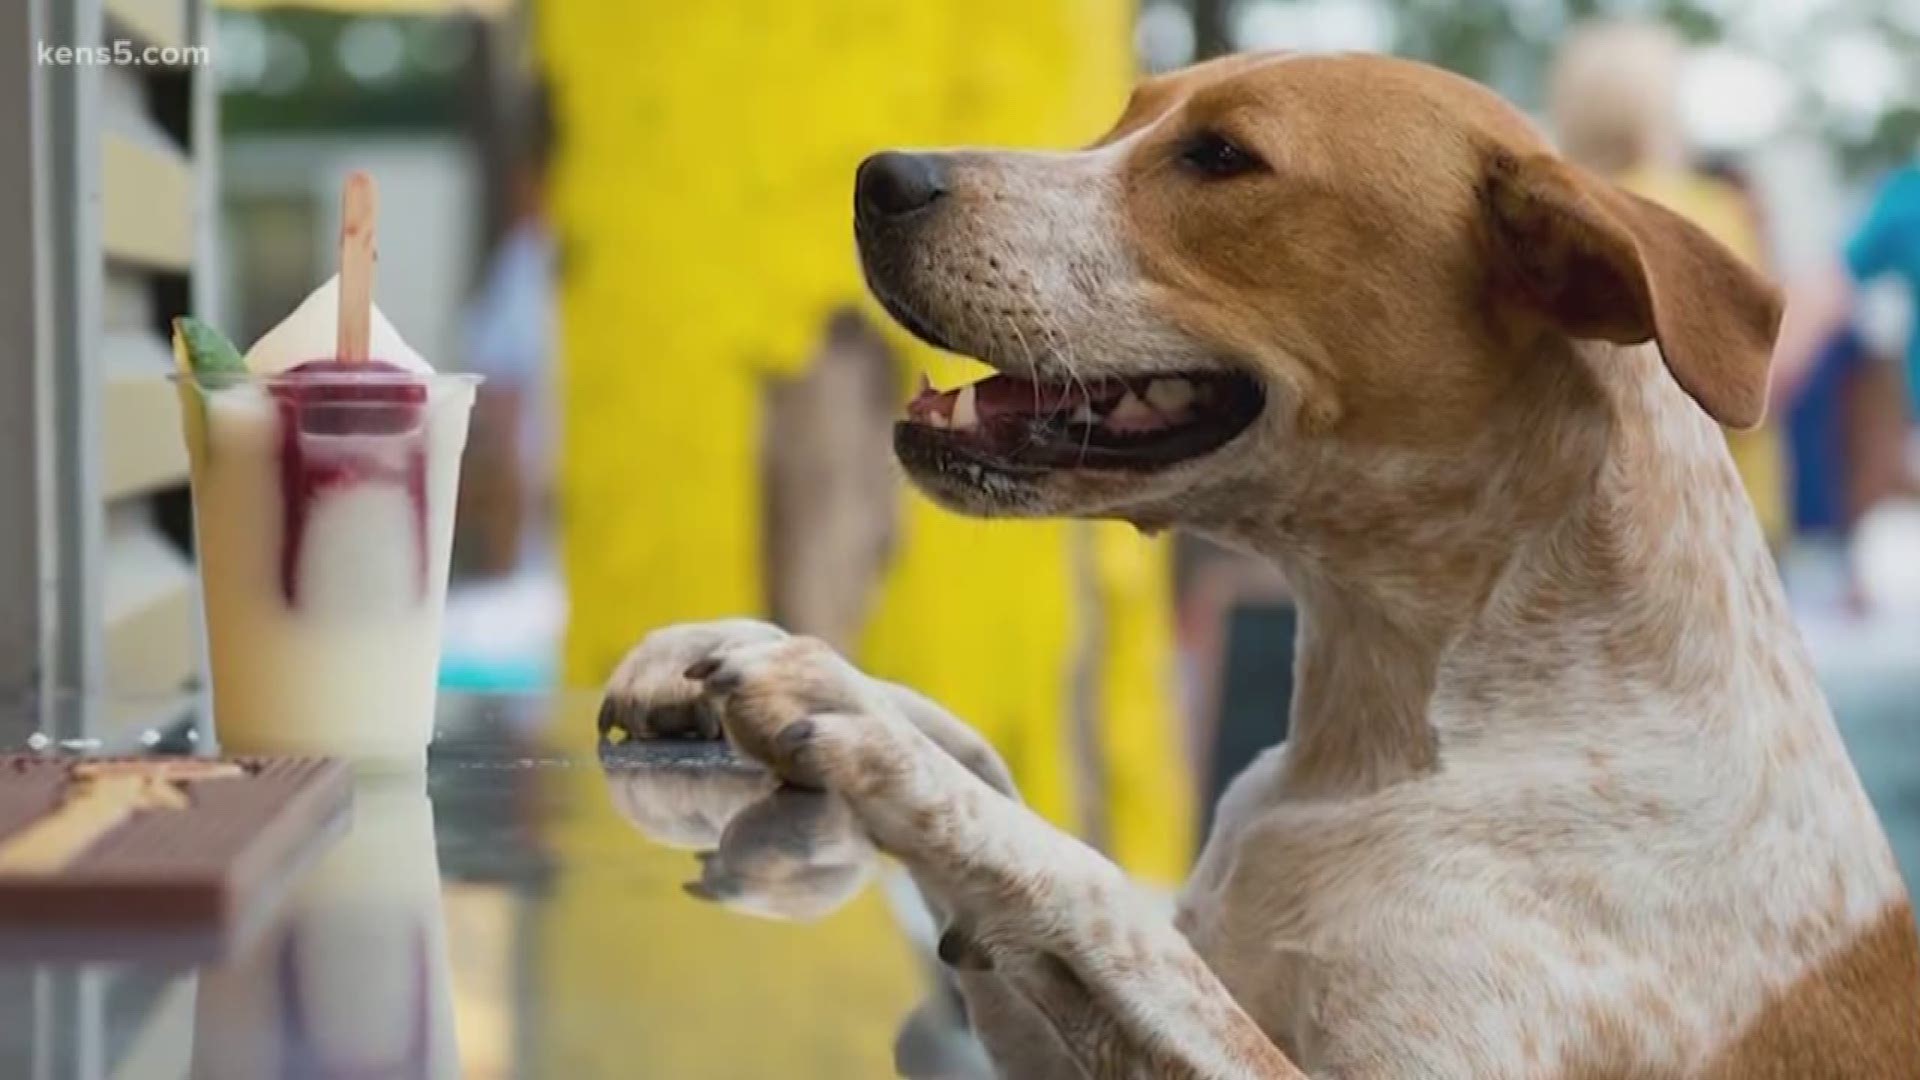 A North Texas dog-friendly bar is hiring a "puptern" to pet puppies for $100 per hour.